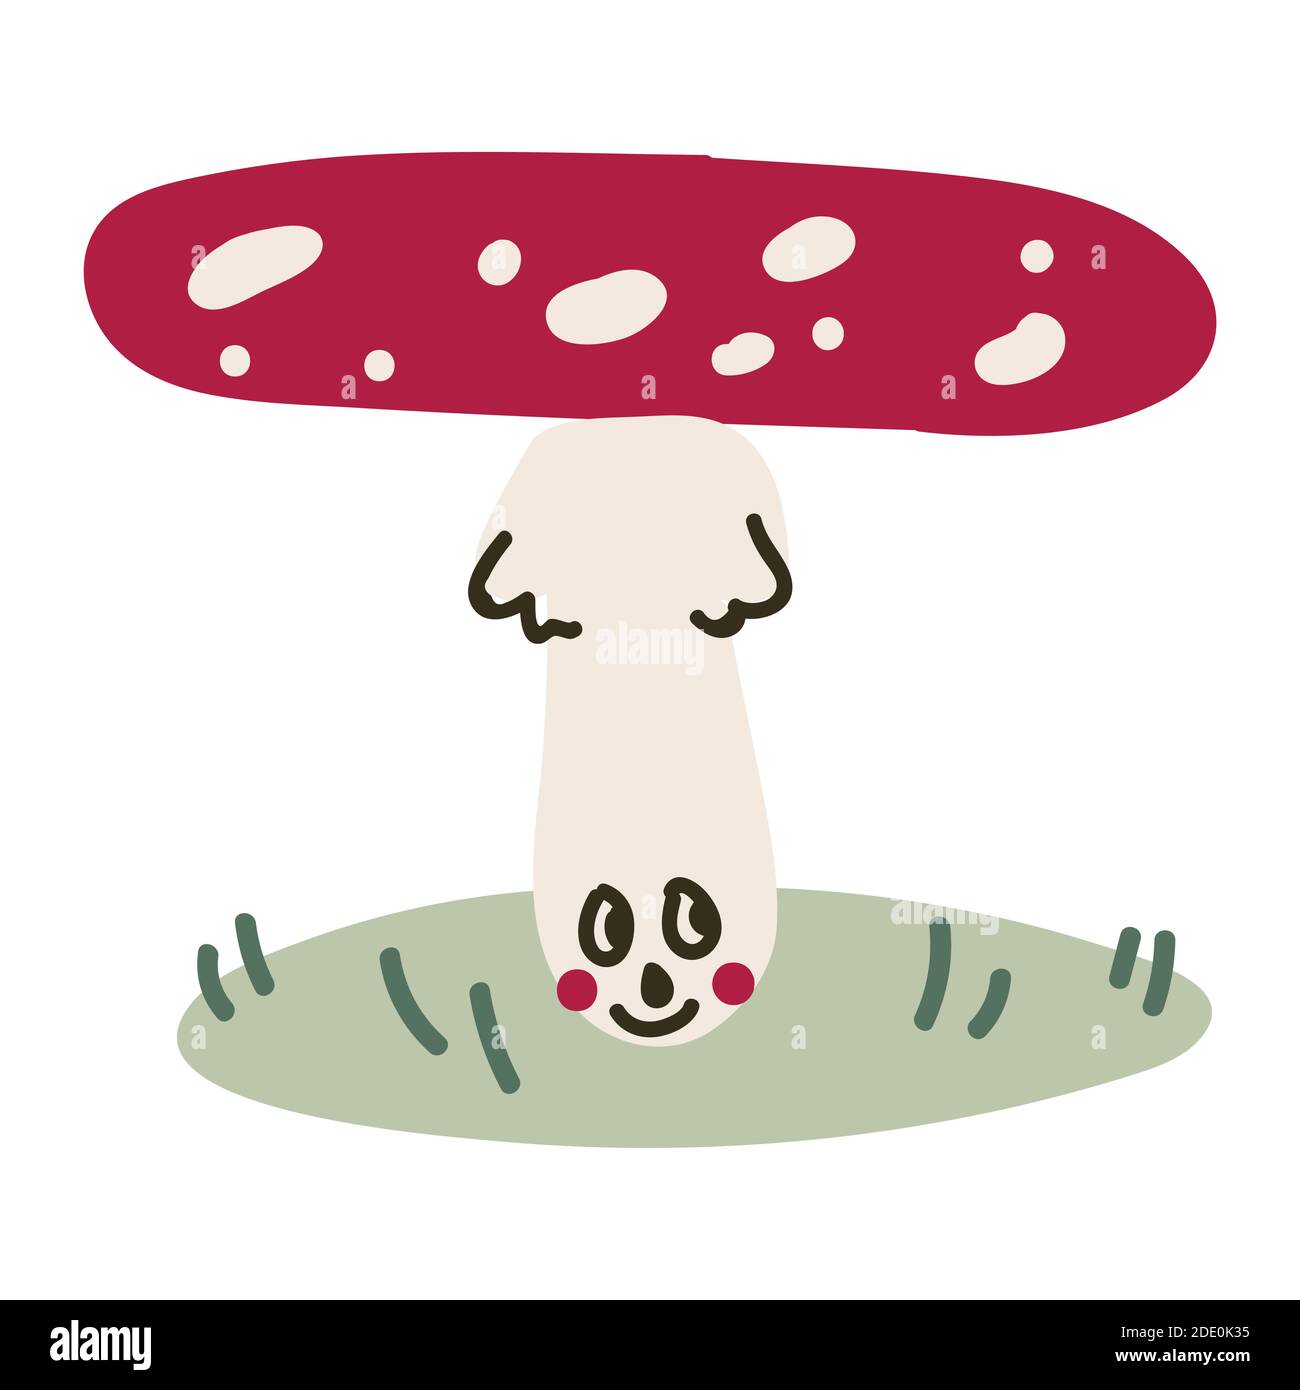 poisonous mushroom images and clipart